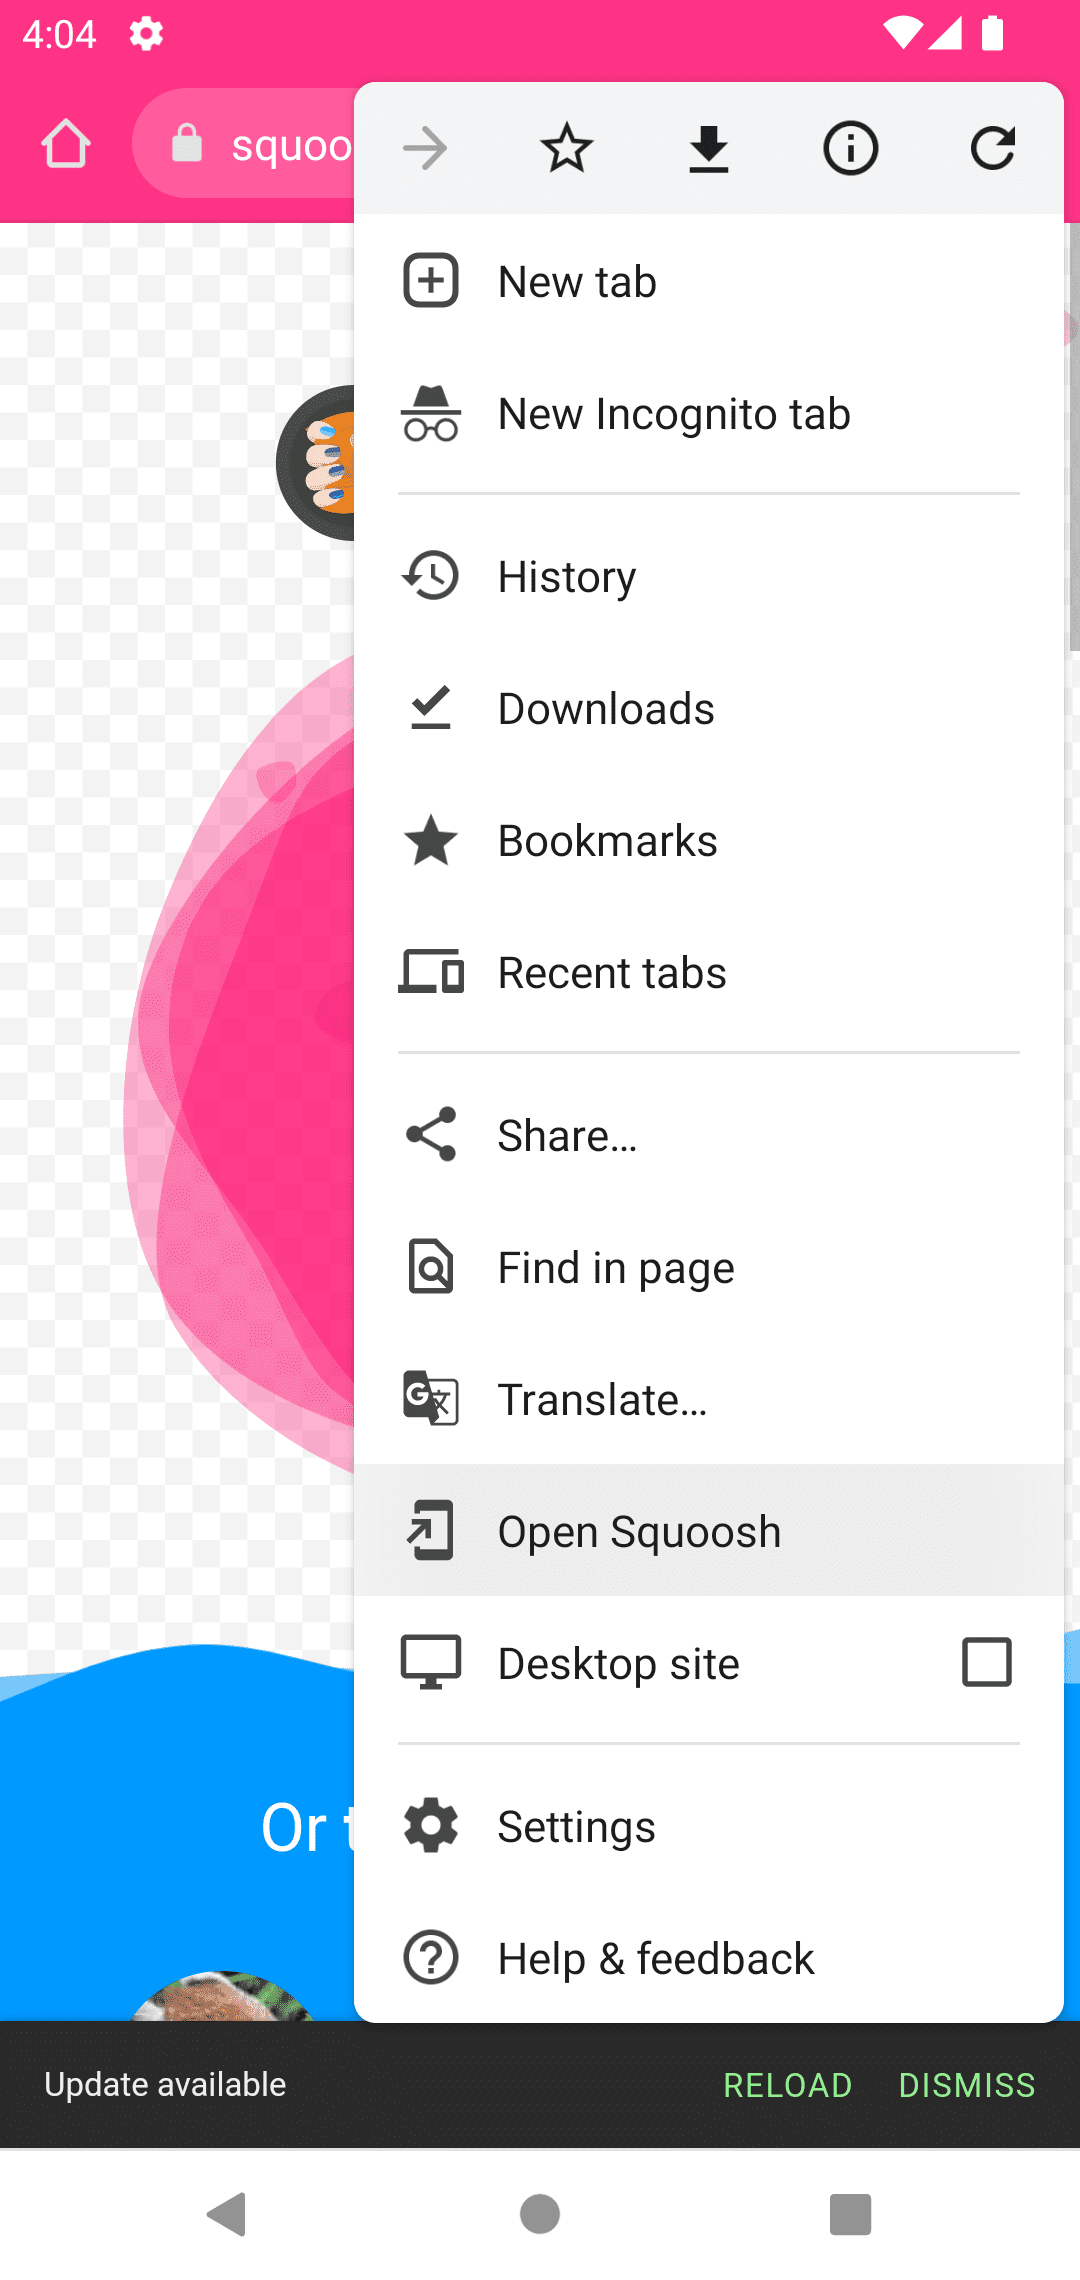 Chrome on Android shows menu item to open a new navigation in a PWA window.